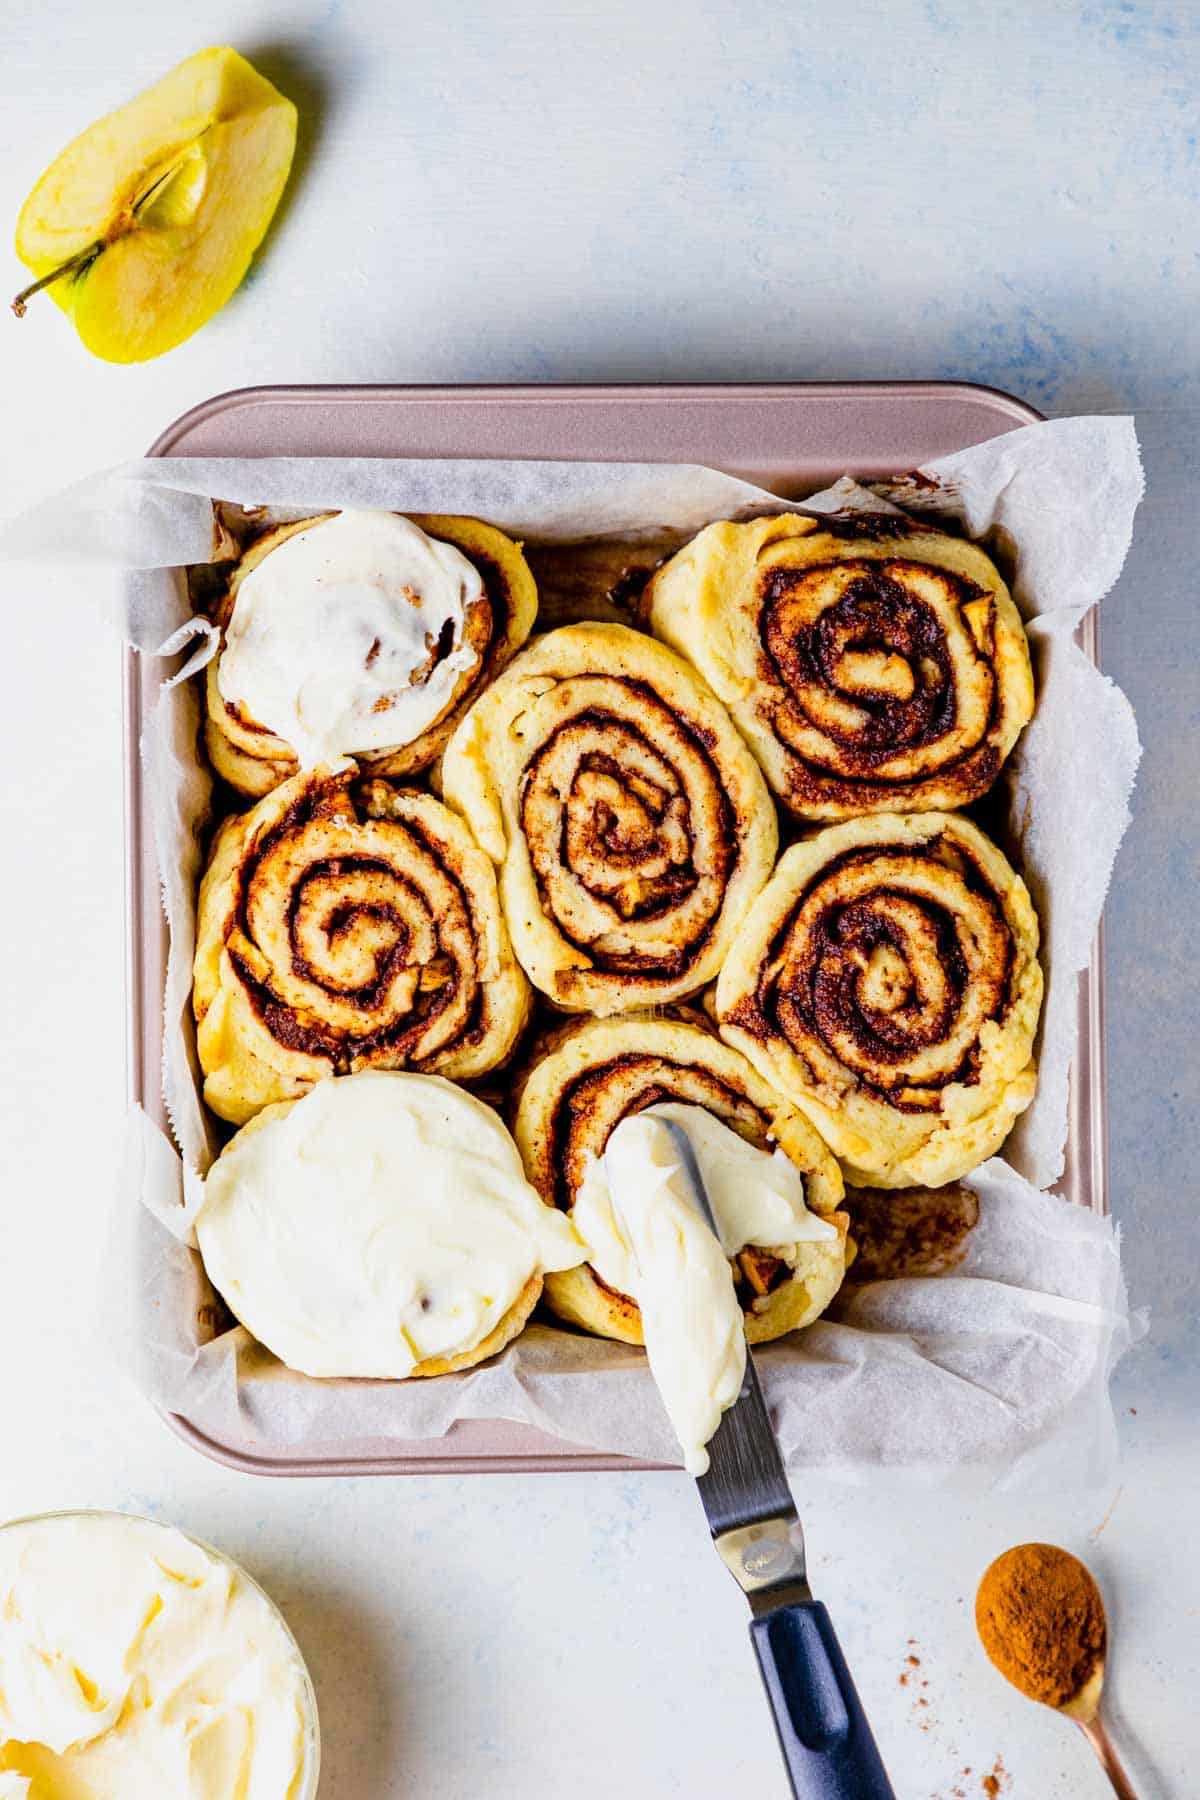 Cinnamon rolls with apple pie fillings being frosted with cream cheese frosting.